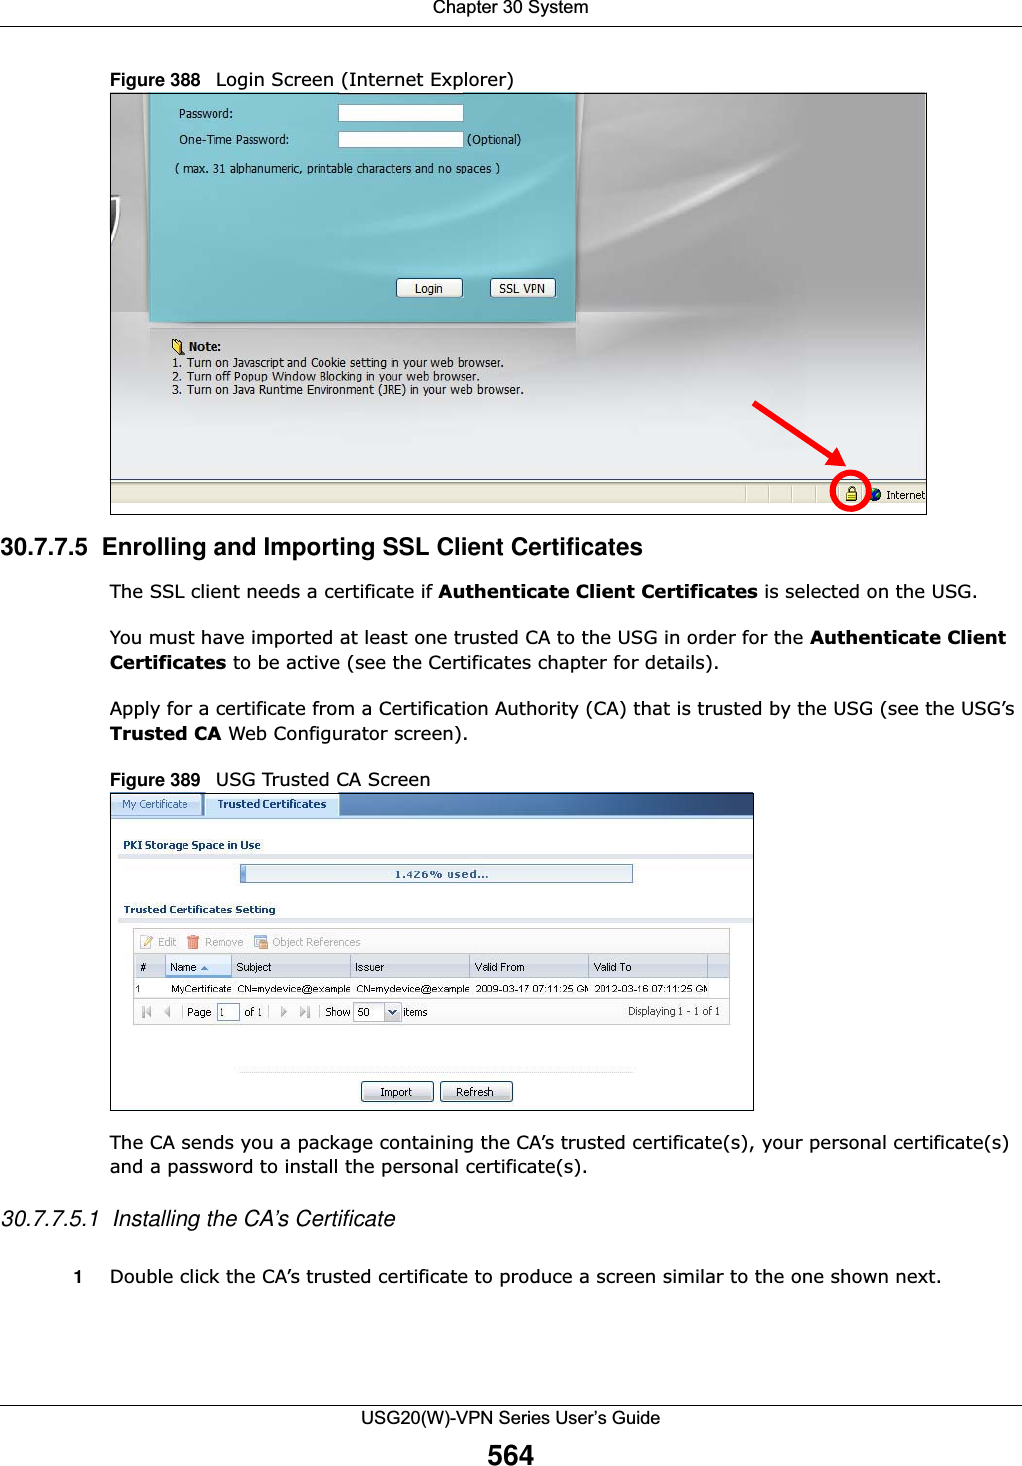 Chapter 30 SystemUSG20(W)-VPN Series User’s Guide564Figure 388   Login Screen (Internet Explorer)30.7.7.5  Enrolling and Importing SSL Client CertificatesThe SSL client needs a certificate if Authenticate Client Certificates is selected on the USG.You must have imported at least one trusted CA to the USG in order for the Authenticate Client Certificates to be active (see the Certificates chapter for details). Apply for a certificate from a Certification Authority (CA) that is trusted by the USG (see the USG’s Trusted CA Web Configurator screen).Figure 389   USG Trusted CA ScreenThe CA sends you a package containing the CA’s trusted certificate(s), your personal certificate(s) and a password to install the personal certificate(s).30.7.7.5.1  Installing the CA’s Certificate1Double click the CA’s trusted certificate to produce a screen similar to the one shown next.